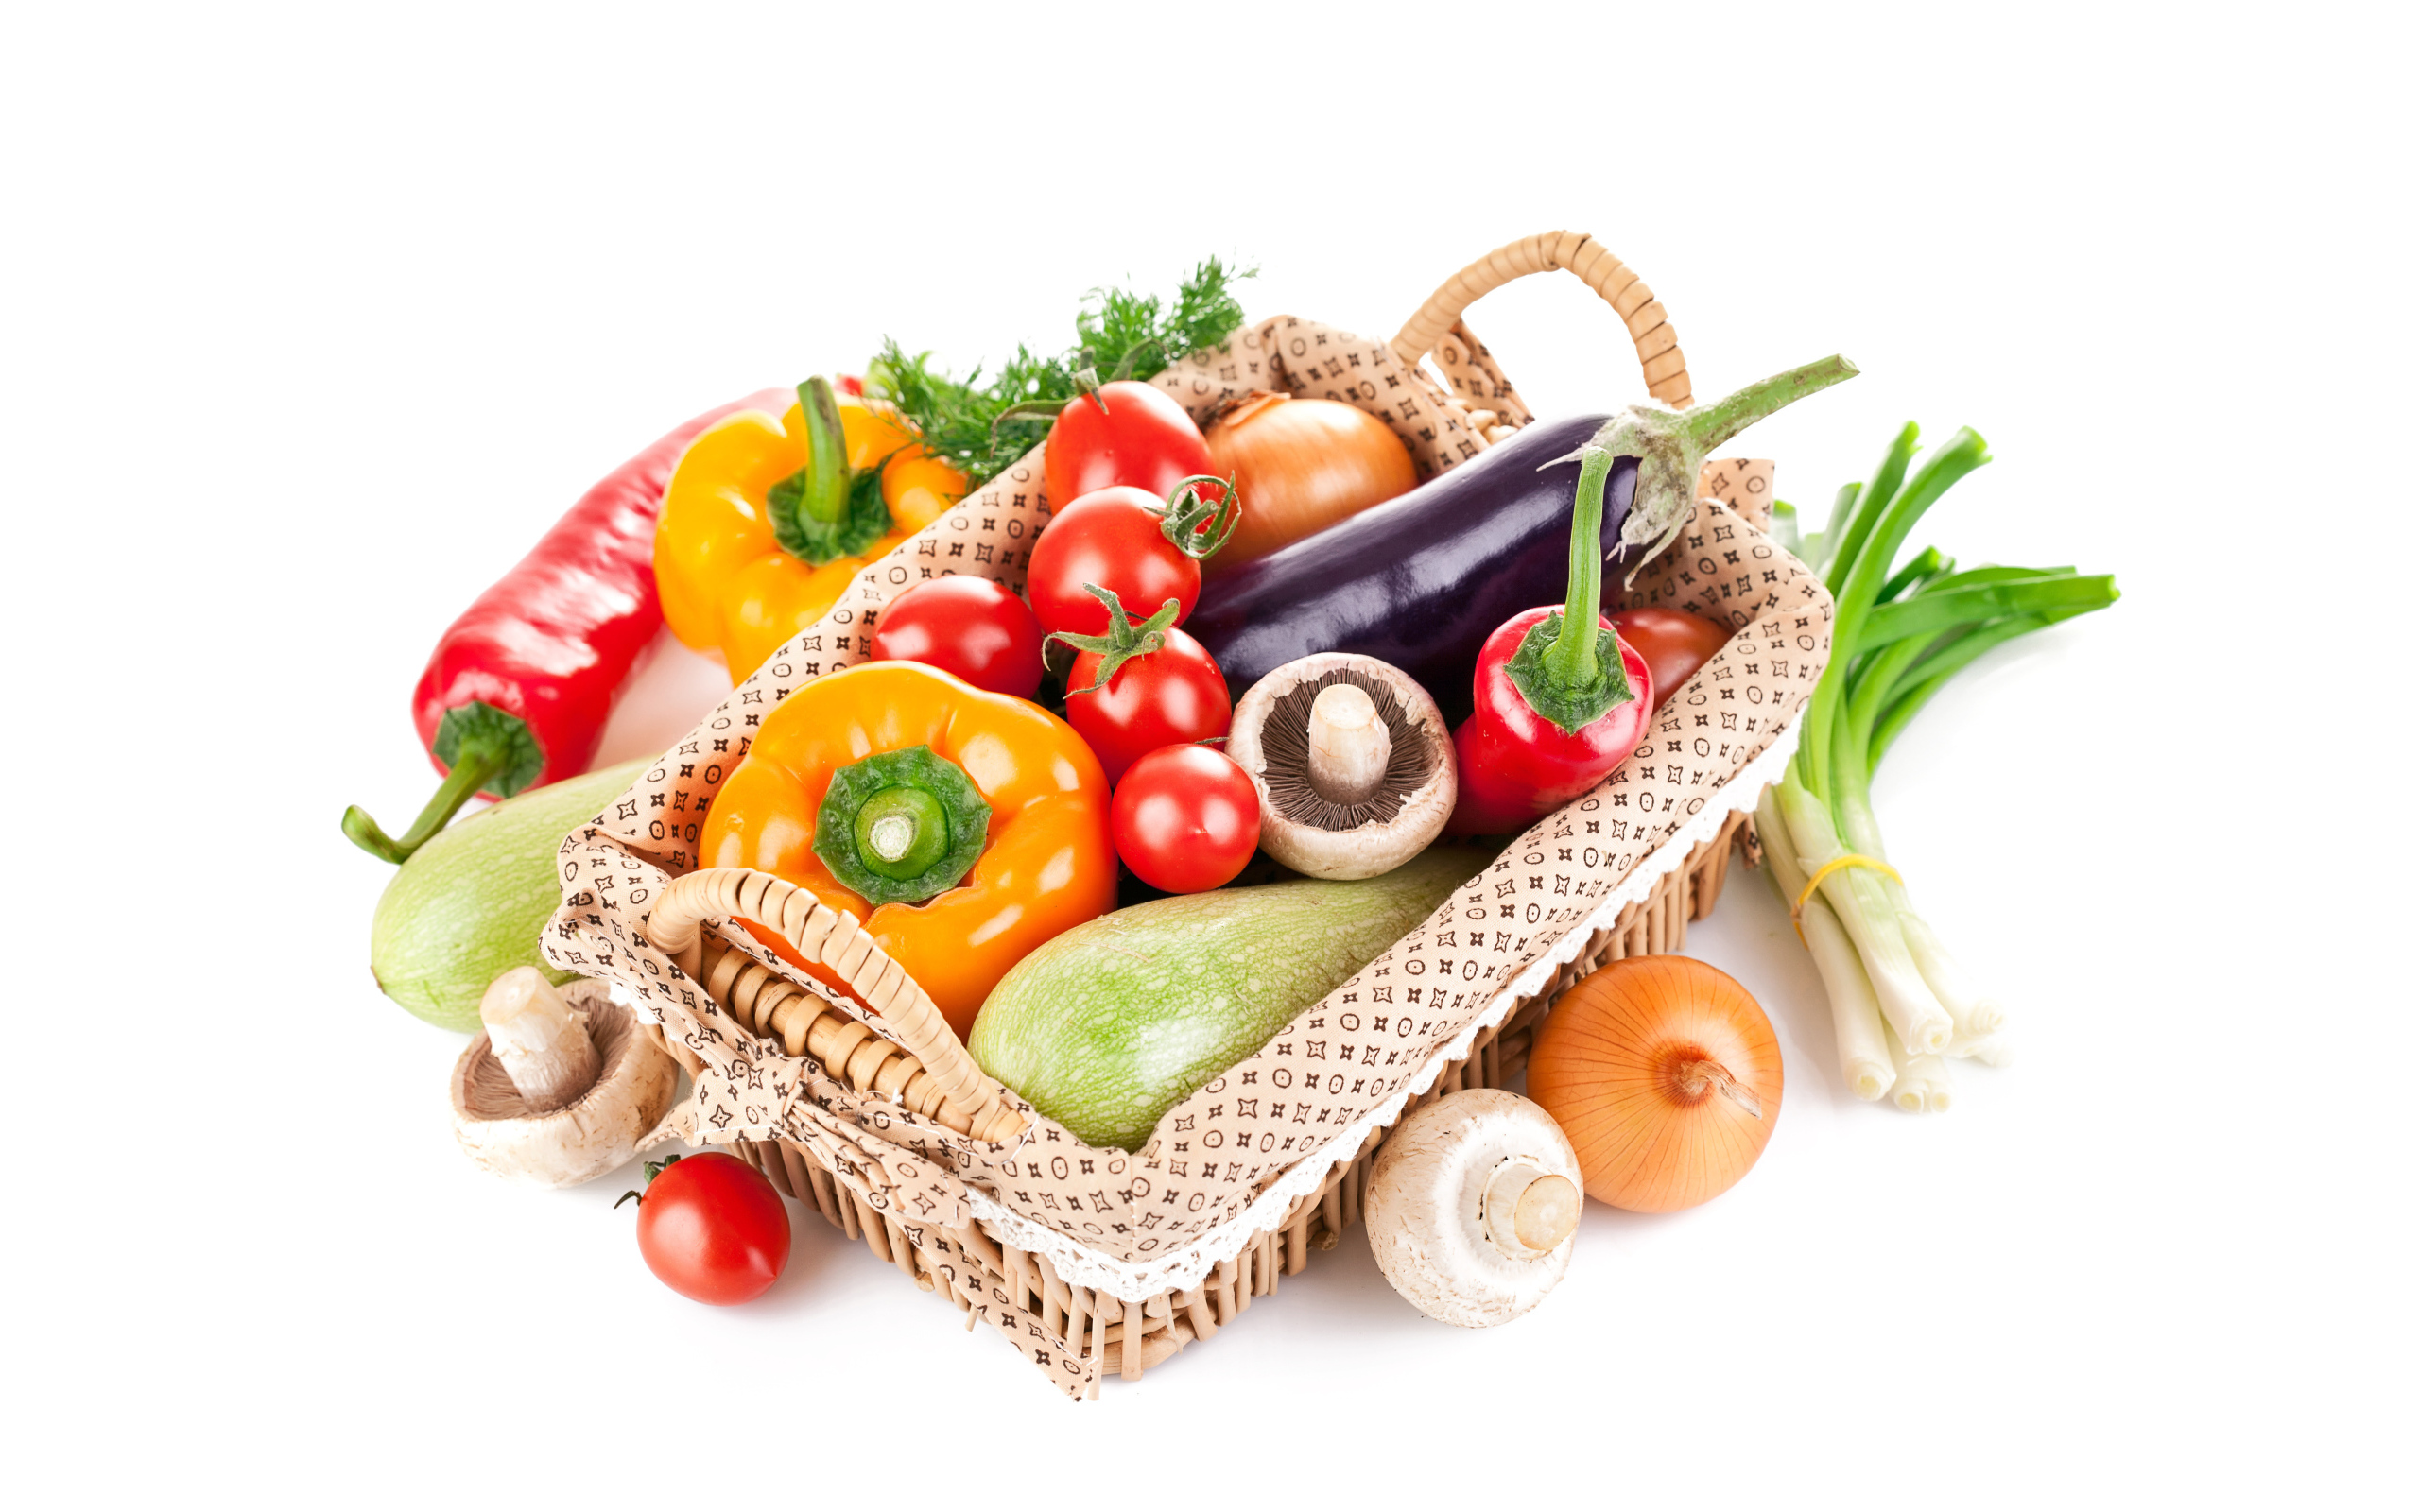 Fresh vegetables in a basket on a white background